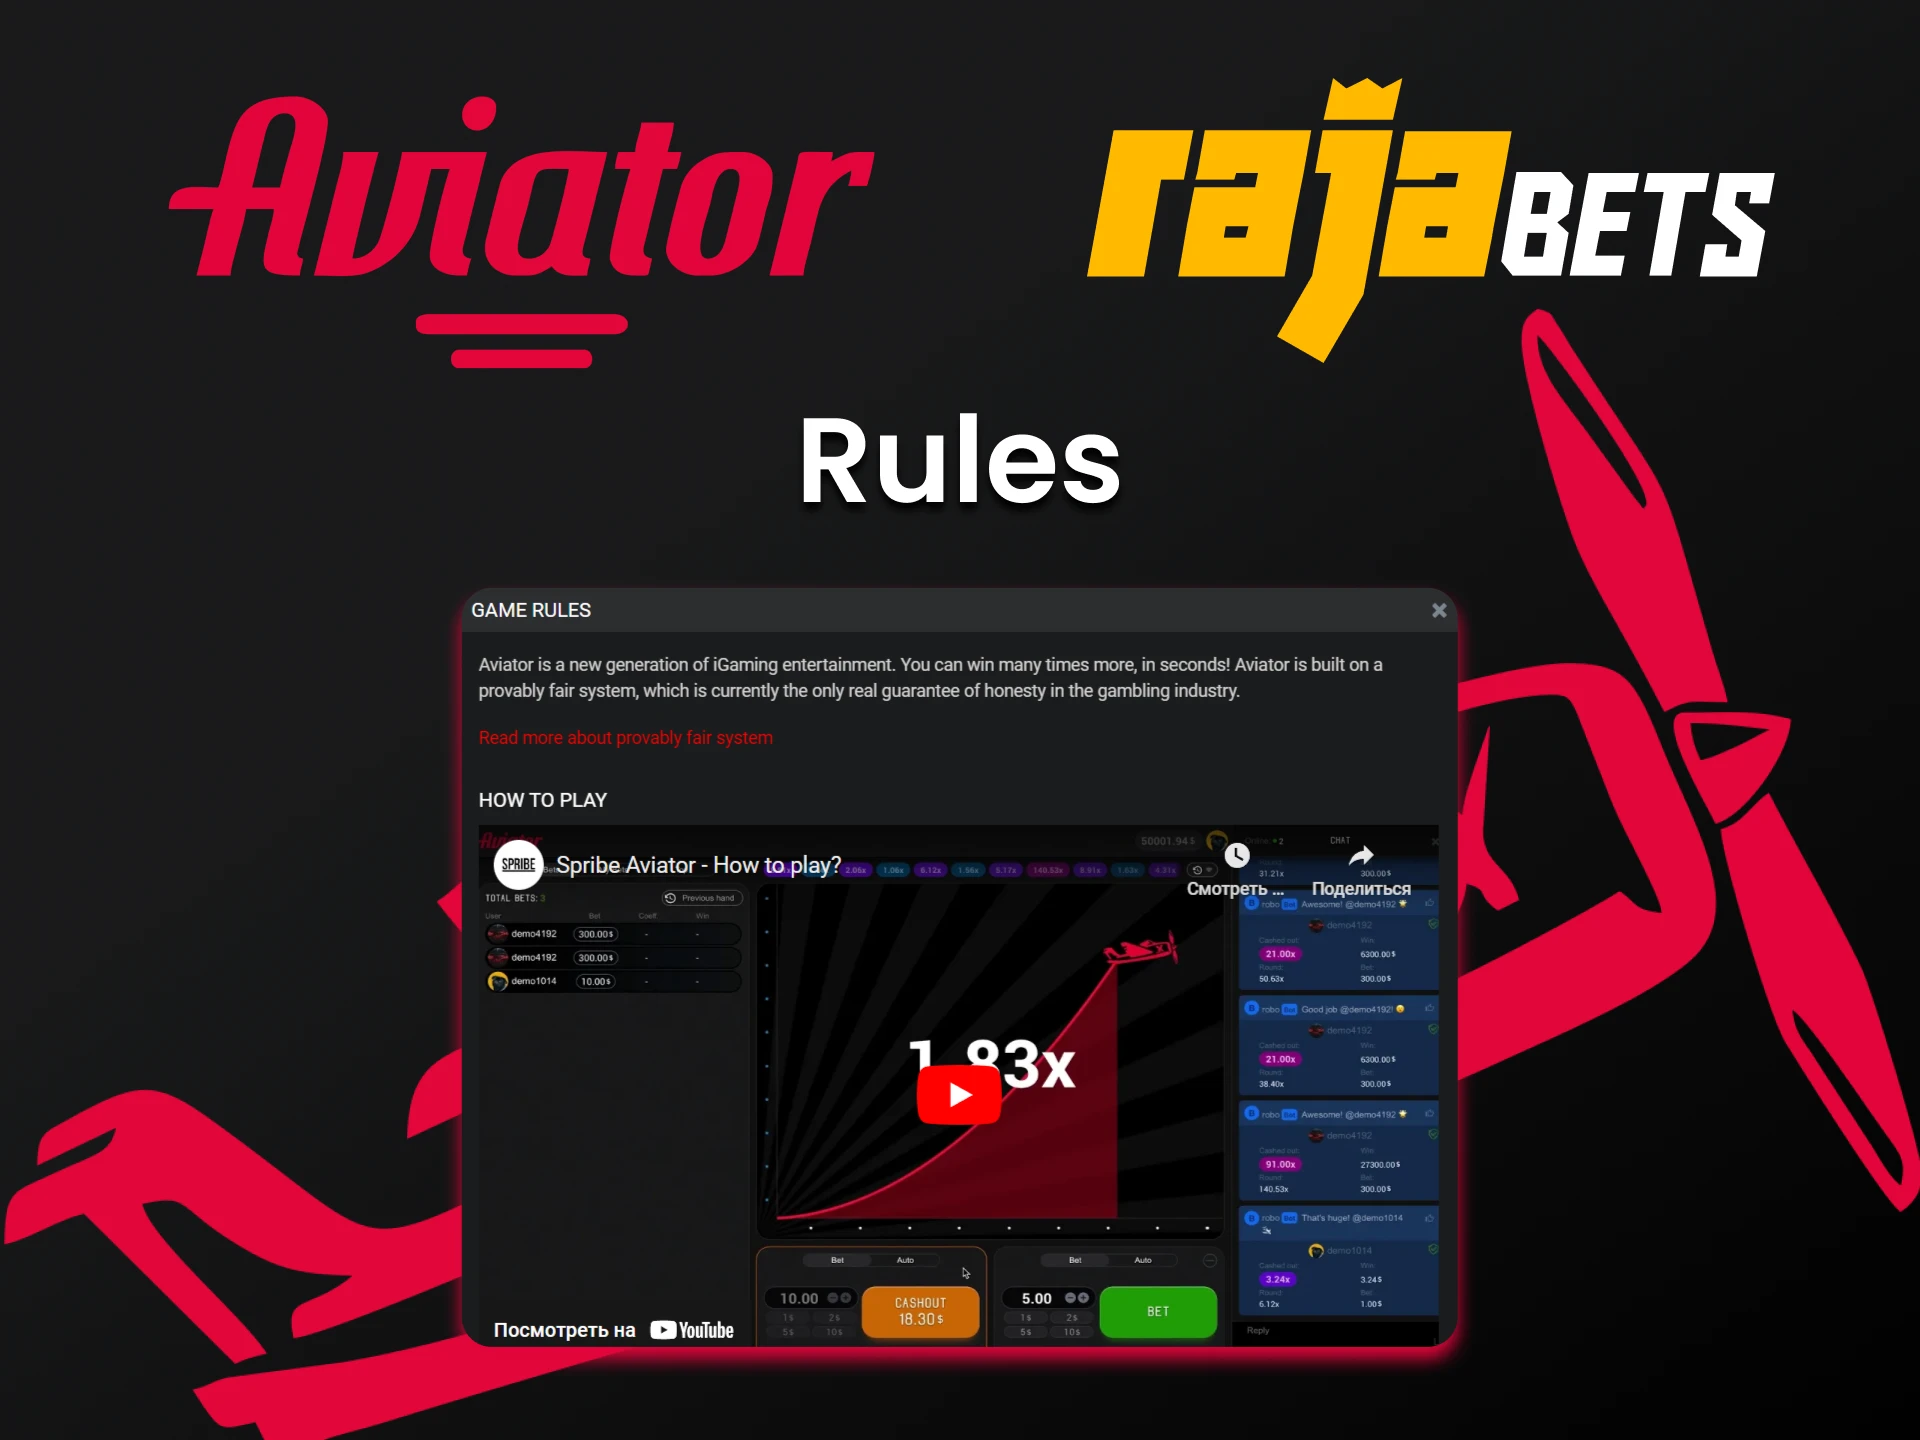 Learn the rules of the Aviator game on Rajabets.